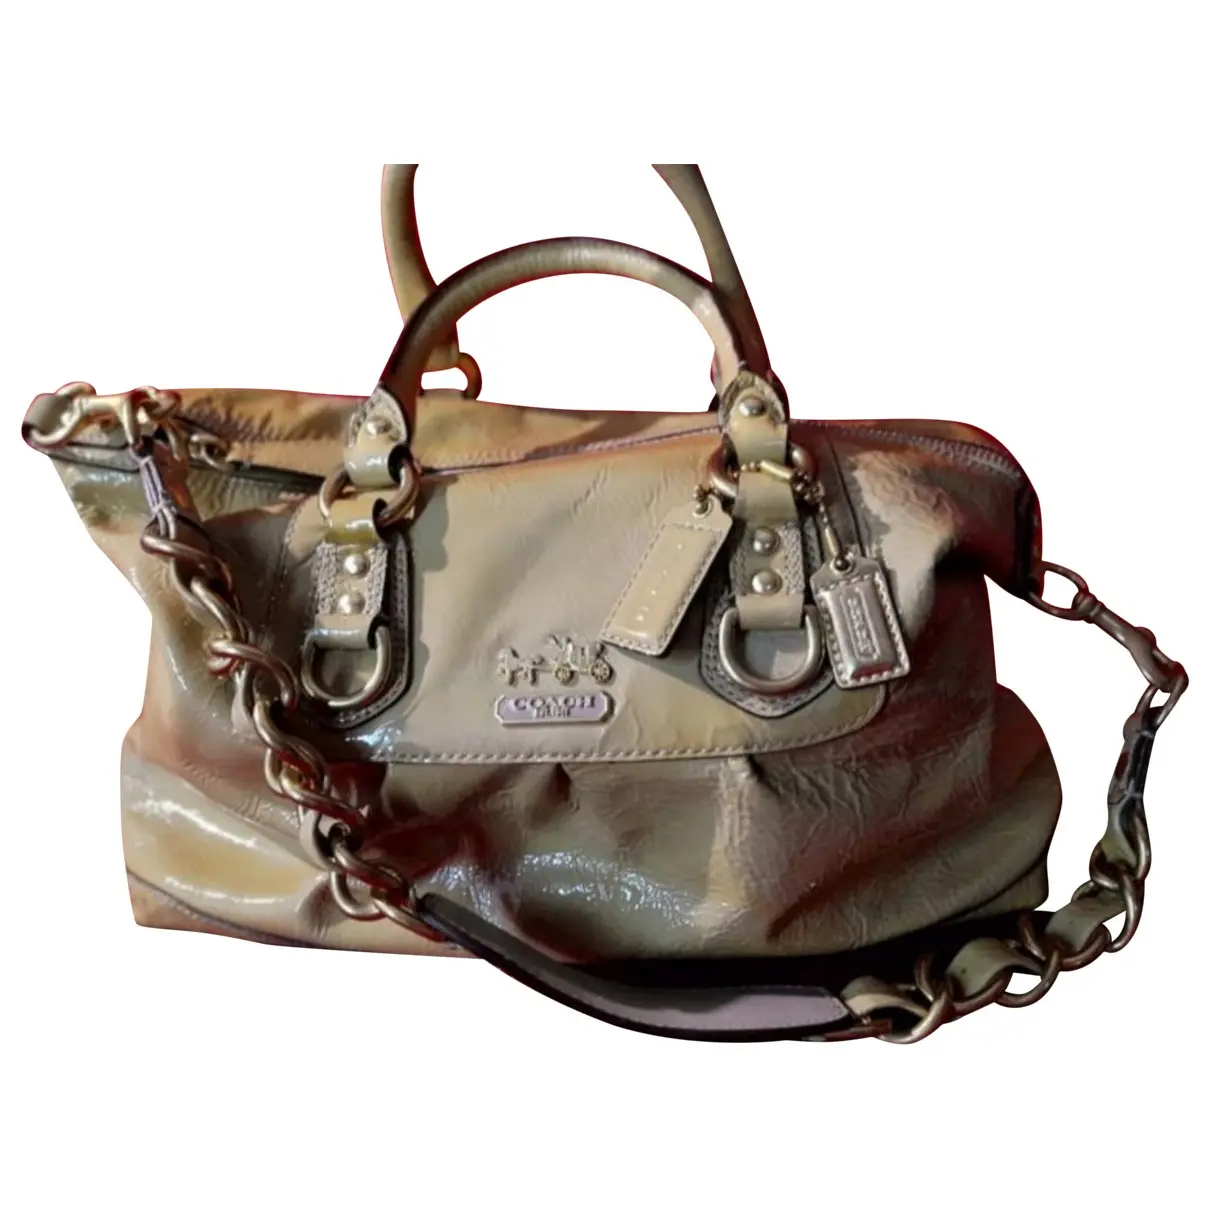 Gramercy Satchel patent leather tote Coach